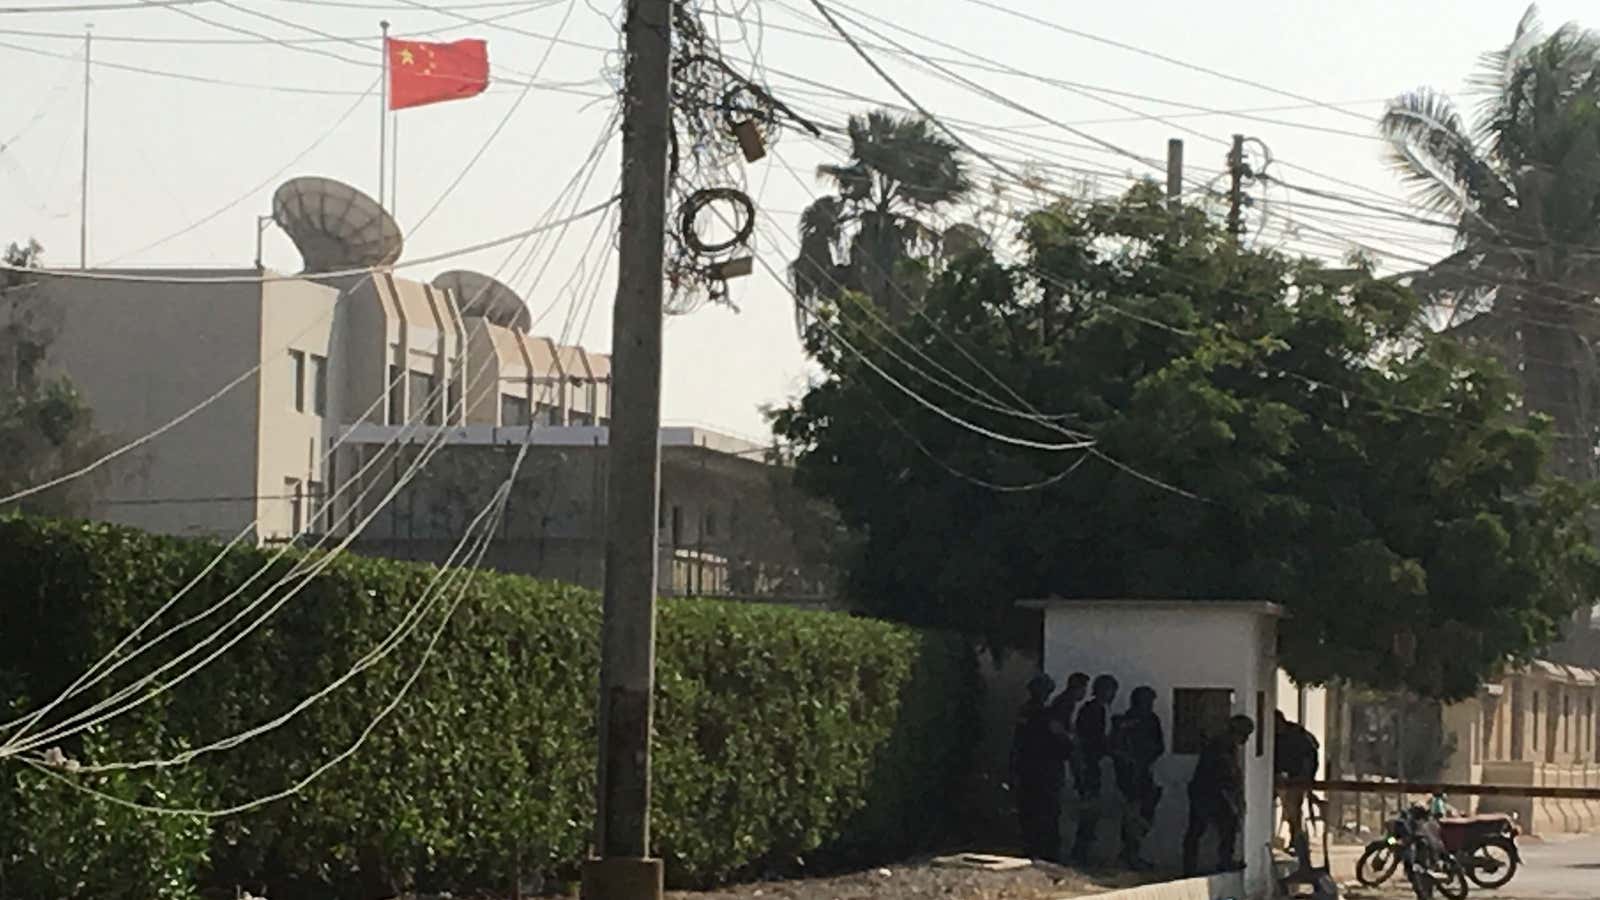 Paramilitary forces and police take cover behind a wall during an attack on the Chinese consulate in Karachi.